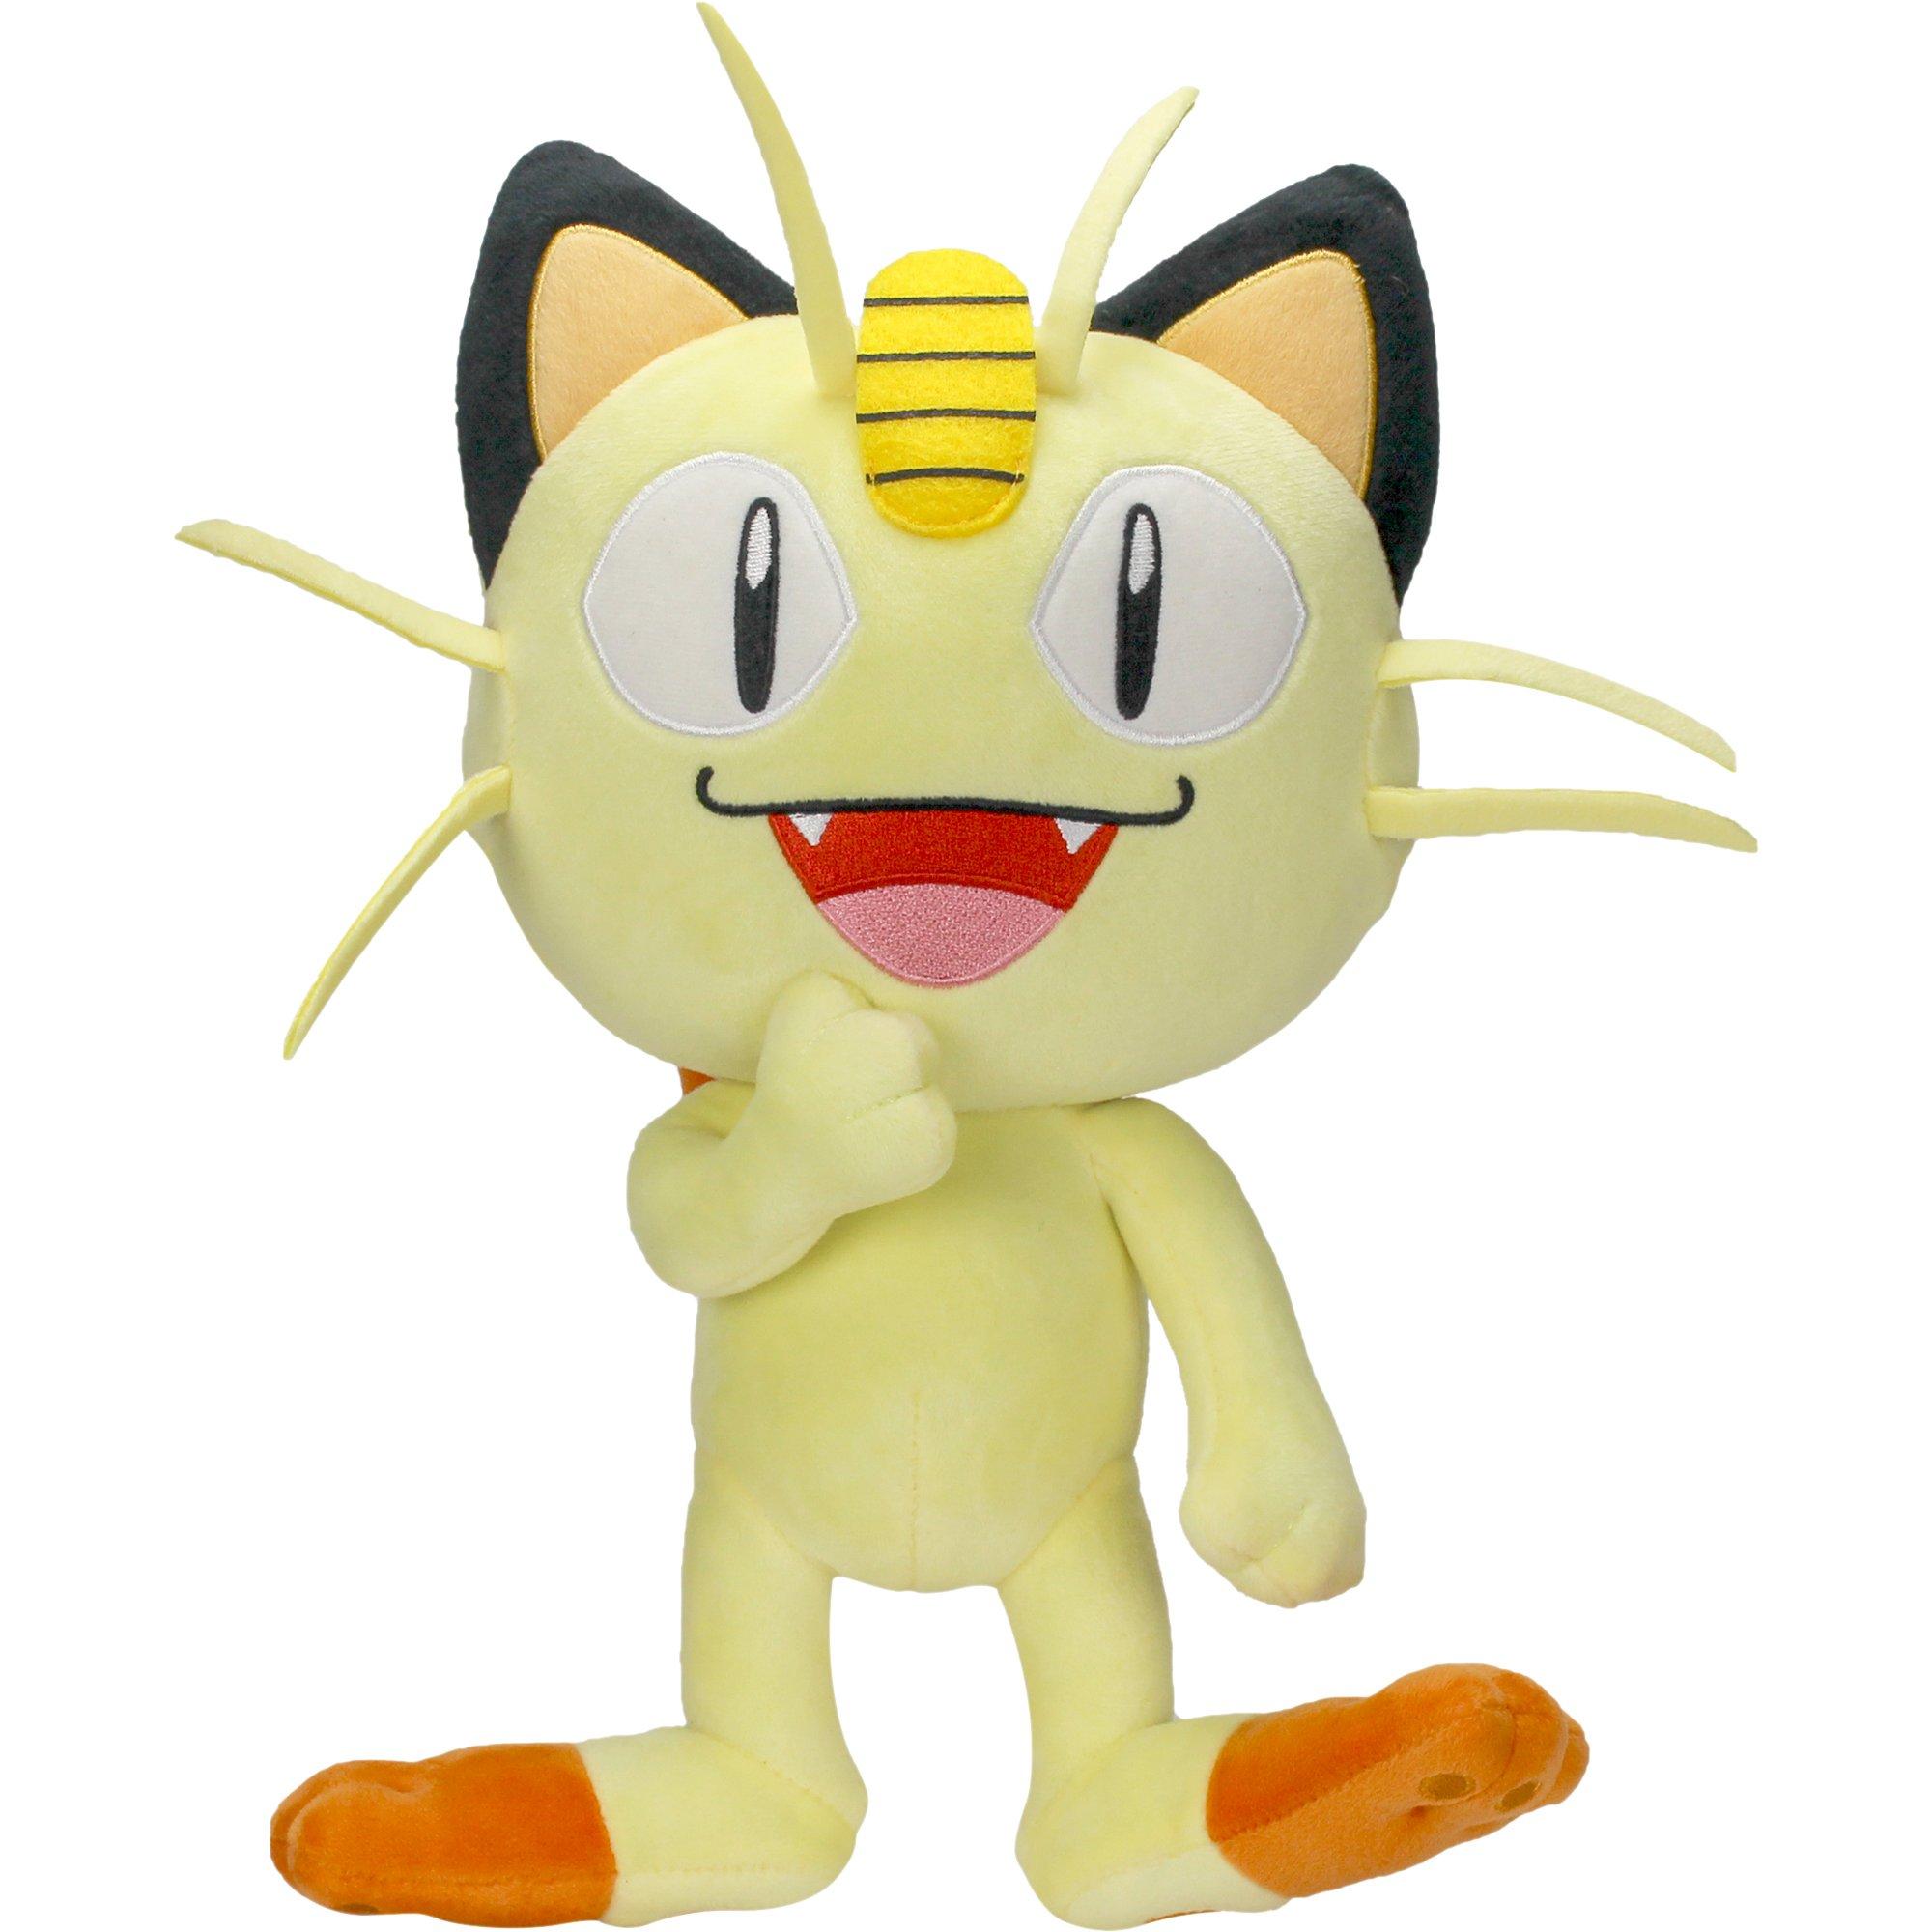 Details about   TOMY Pokemon Meowth T18982 Official New  Deluxe Large Plush Figure